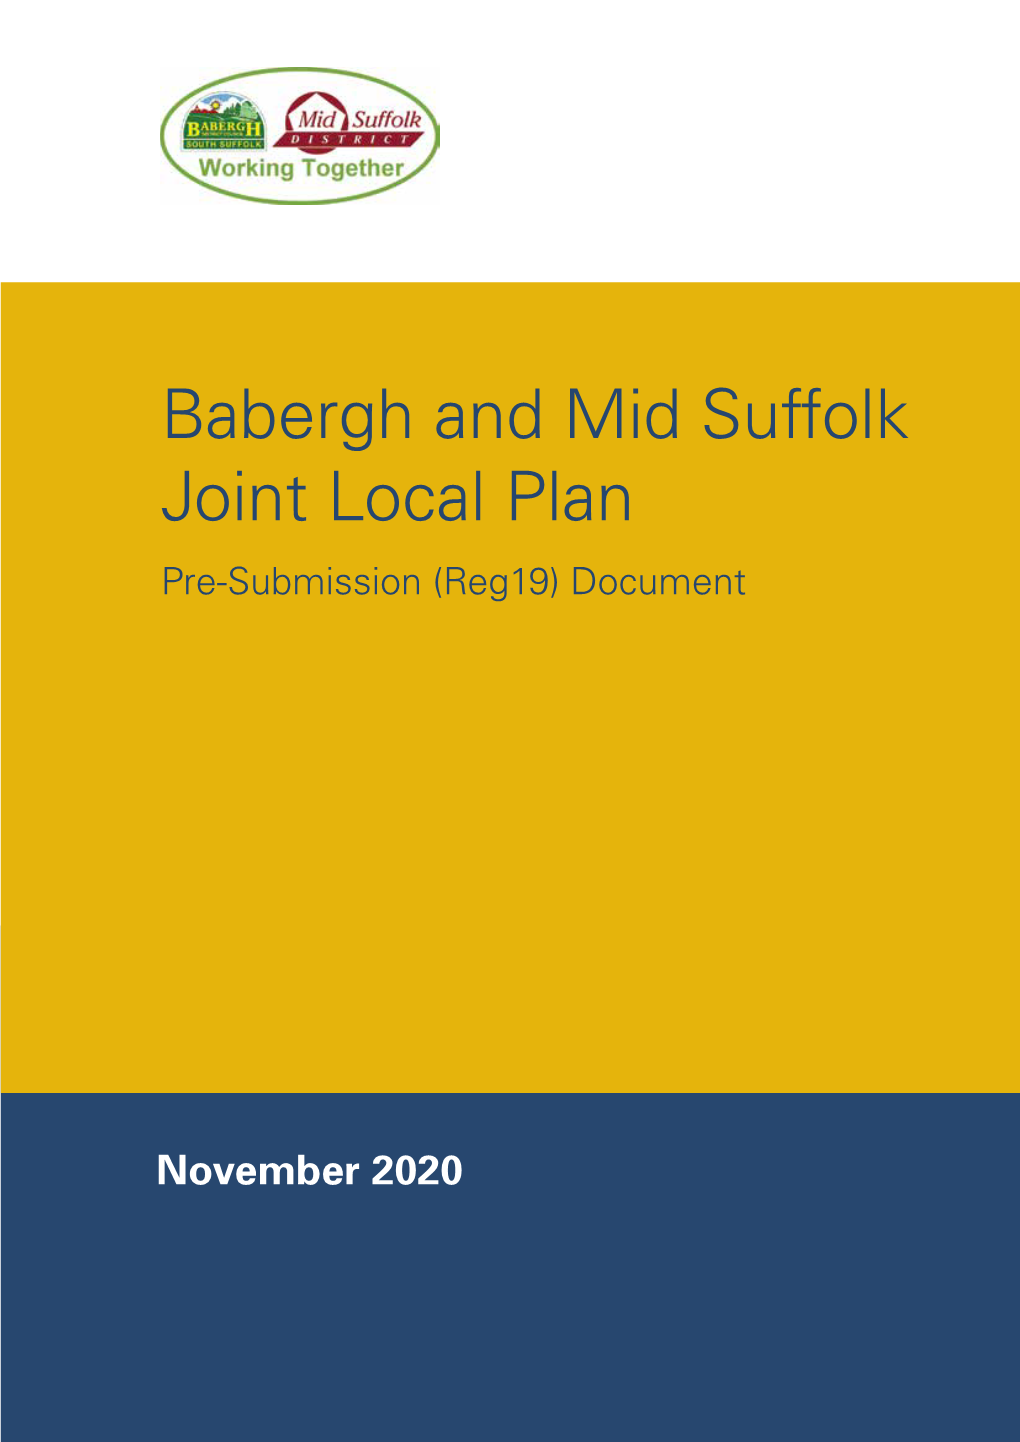 Babergh and Mid Suffolk Joint Local Plan Pre-Submission (Reg19) Document